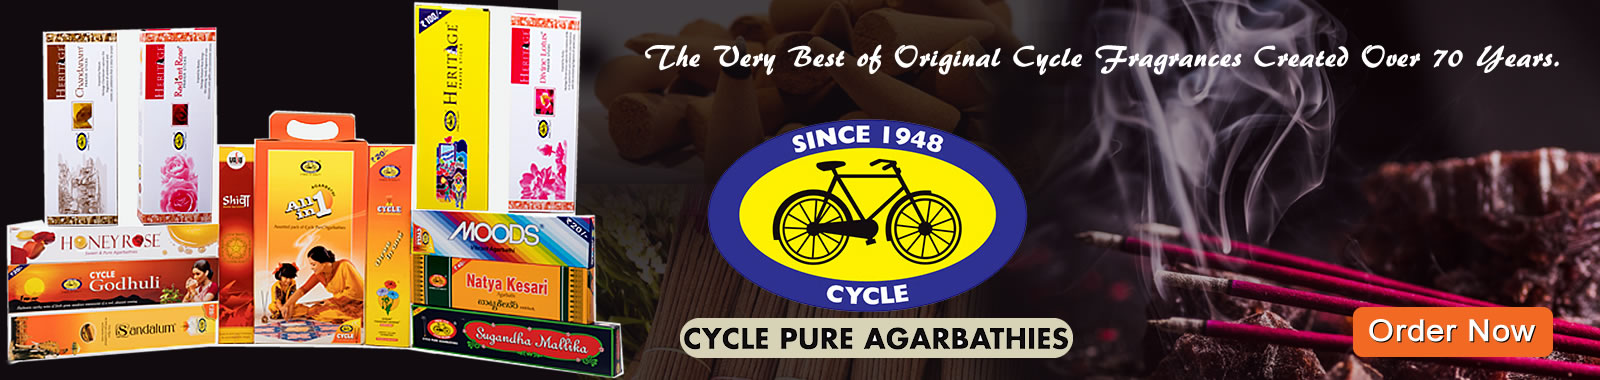 Cycle Brand 